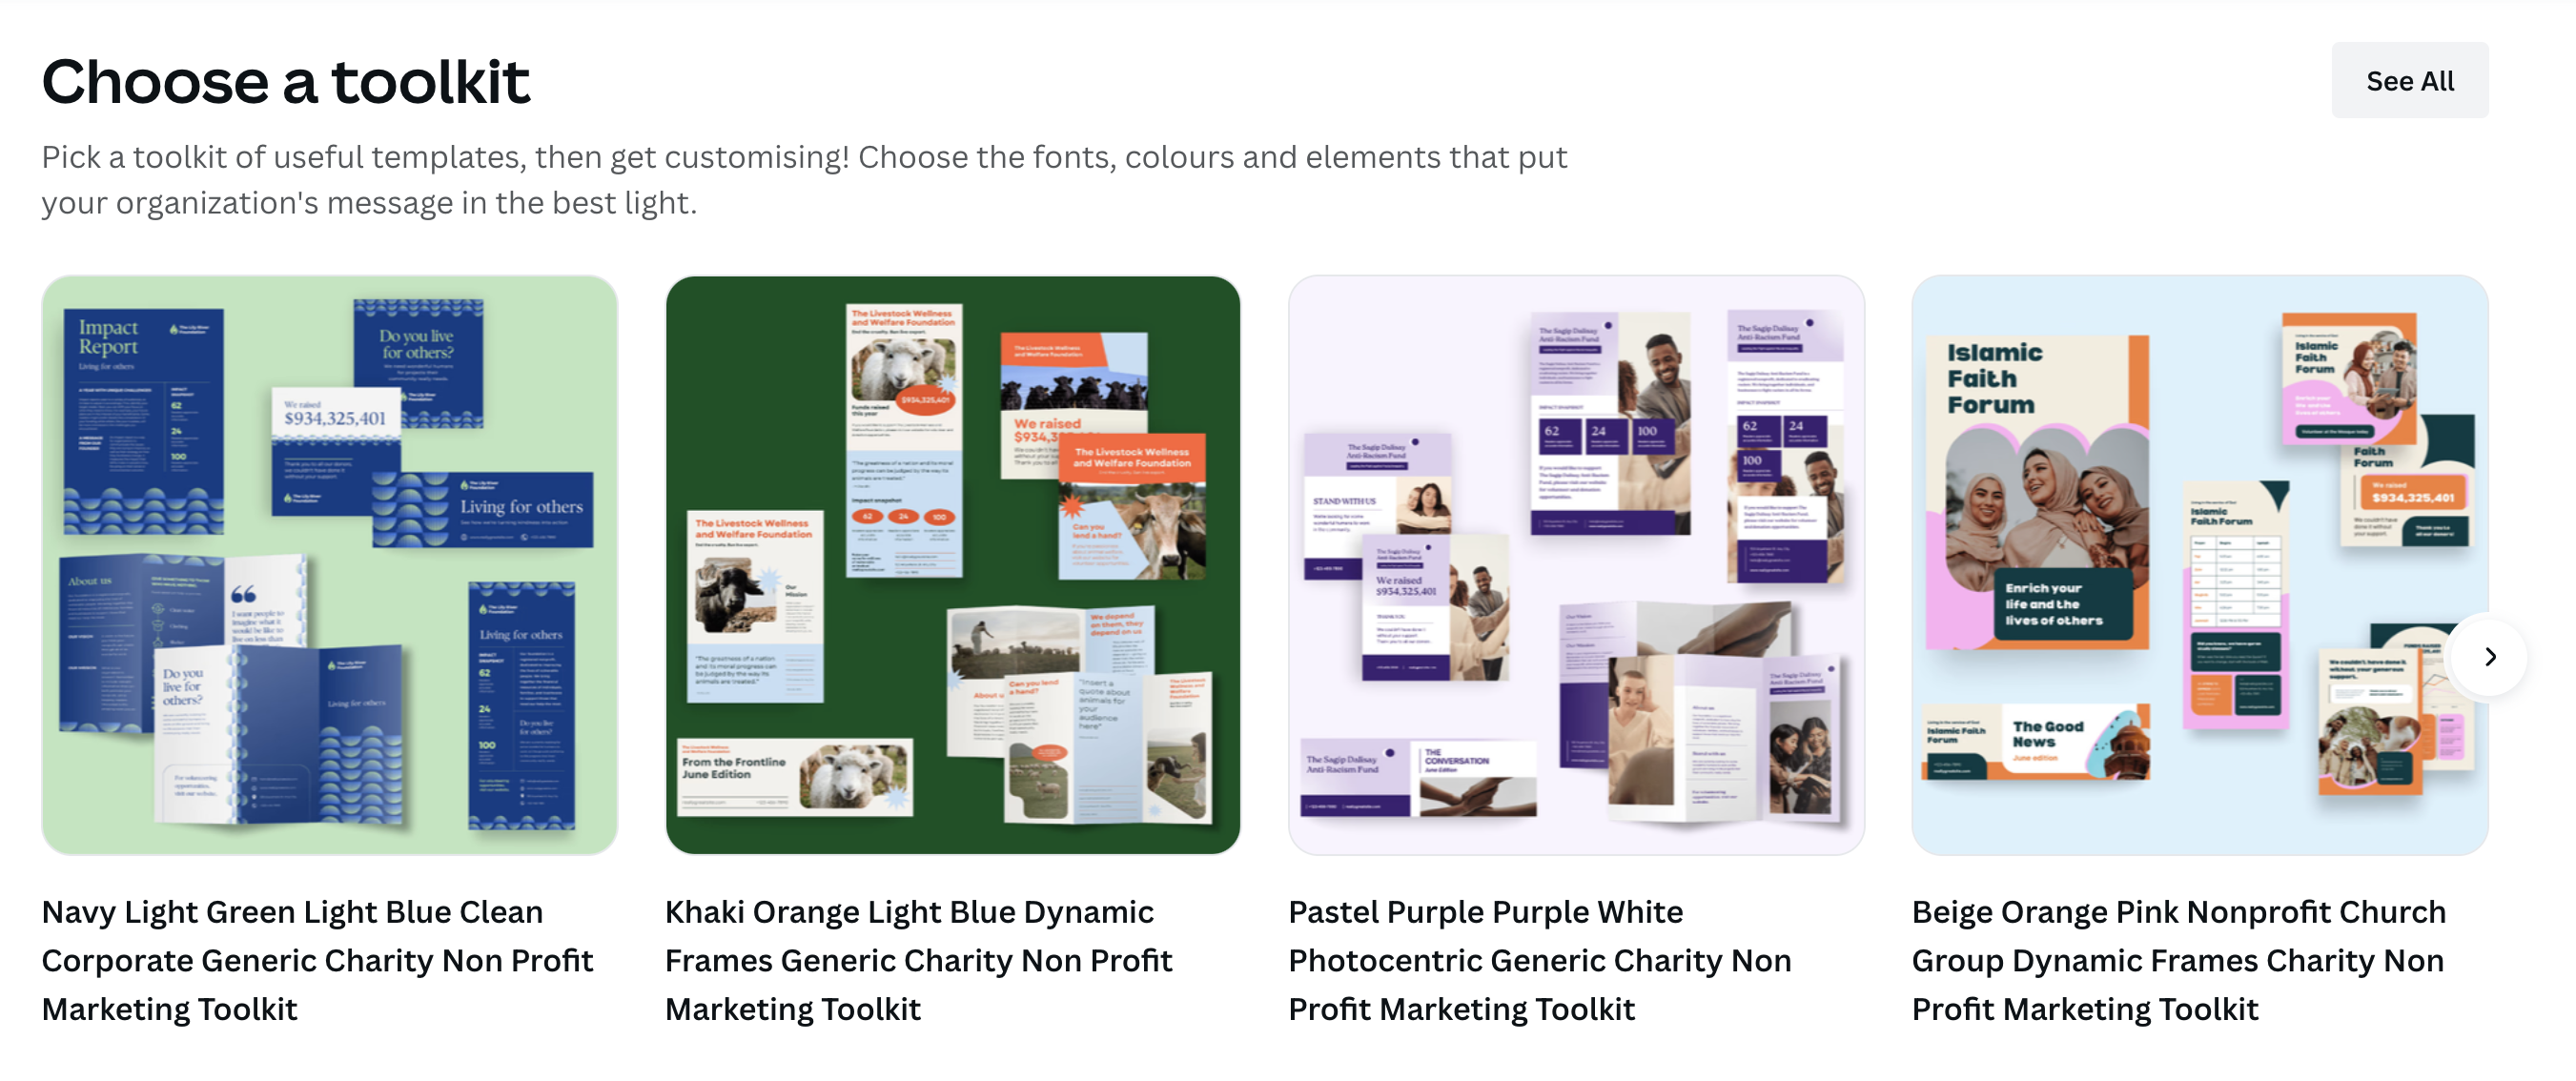 Examples of marketing toolkits available through Canva for Nonprofits